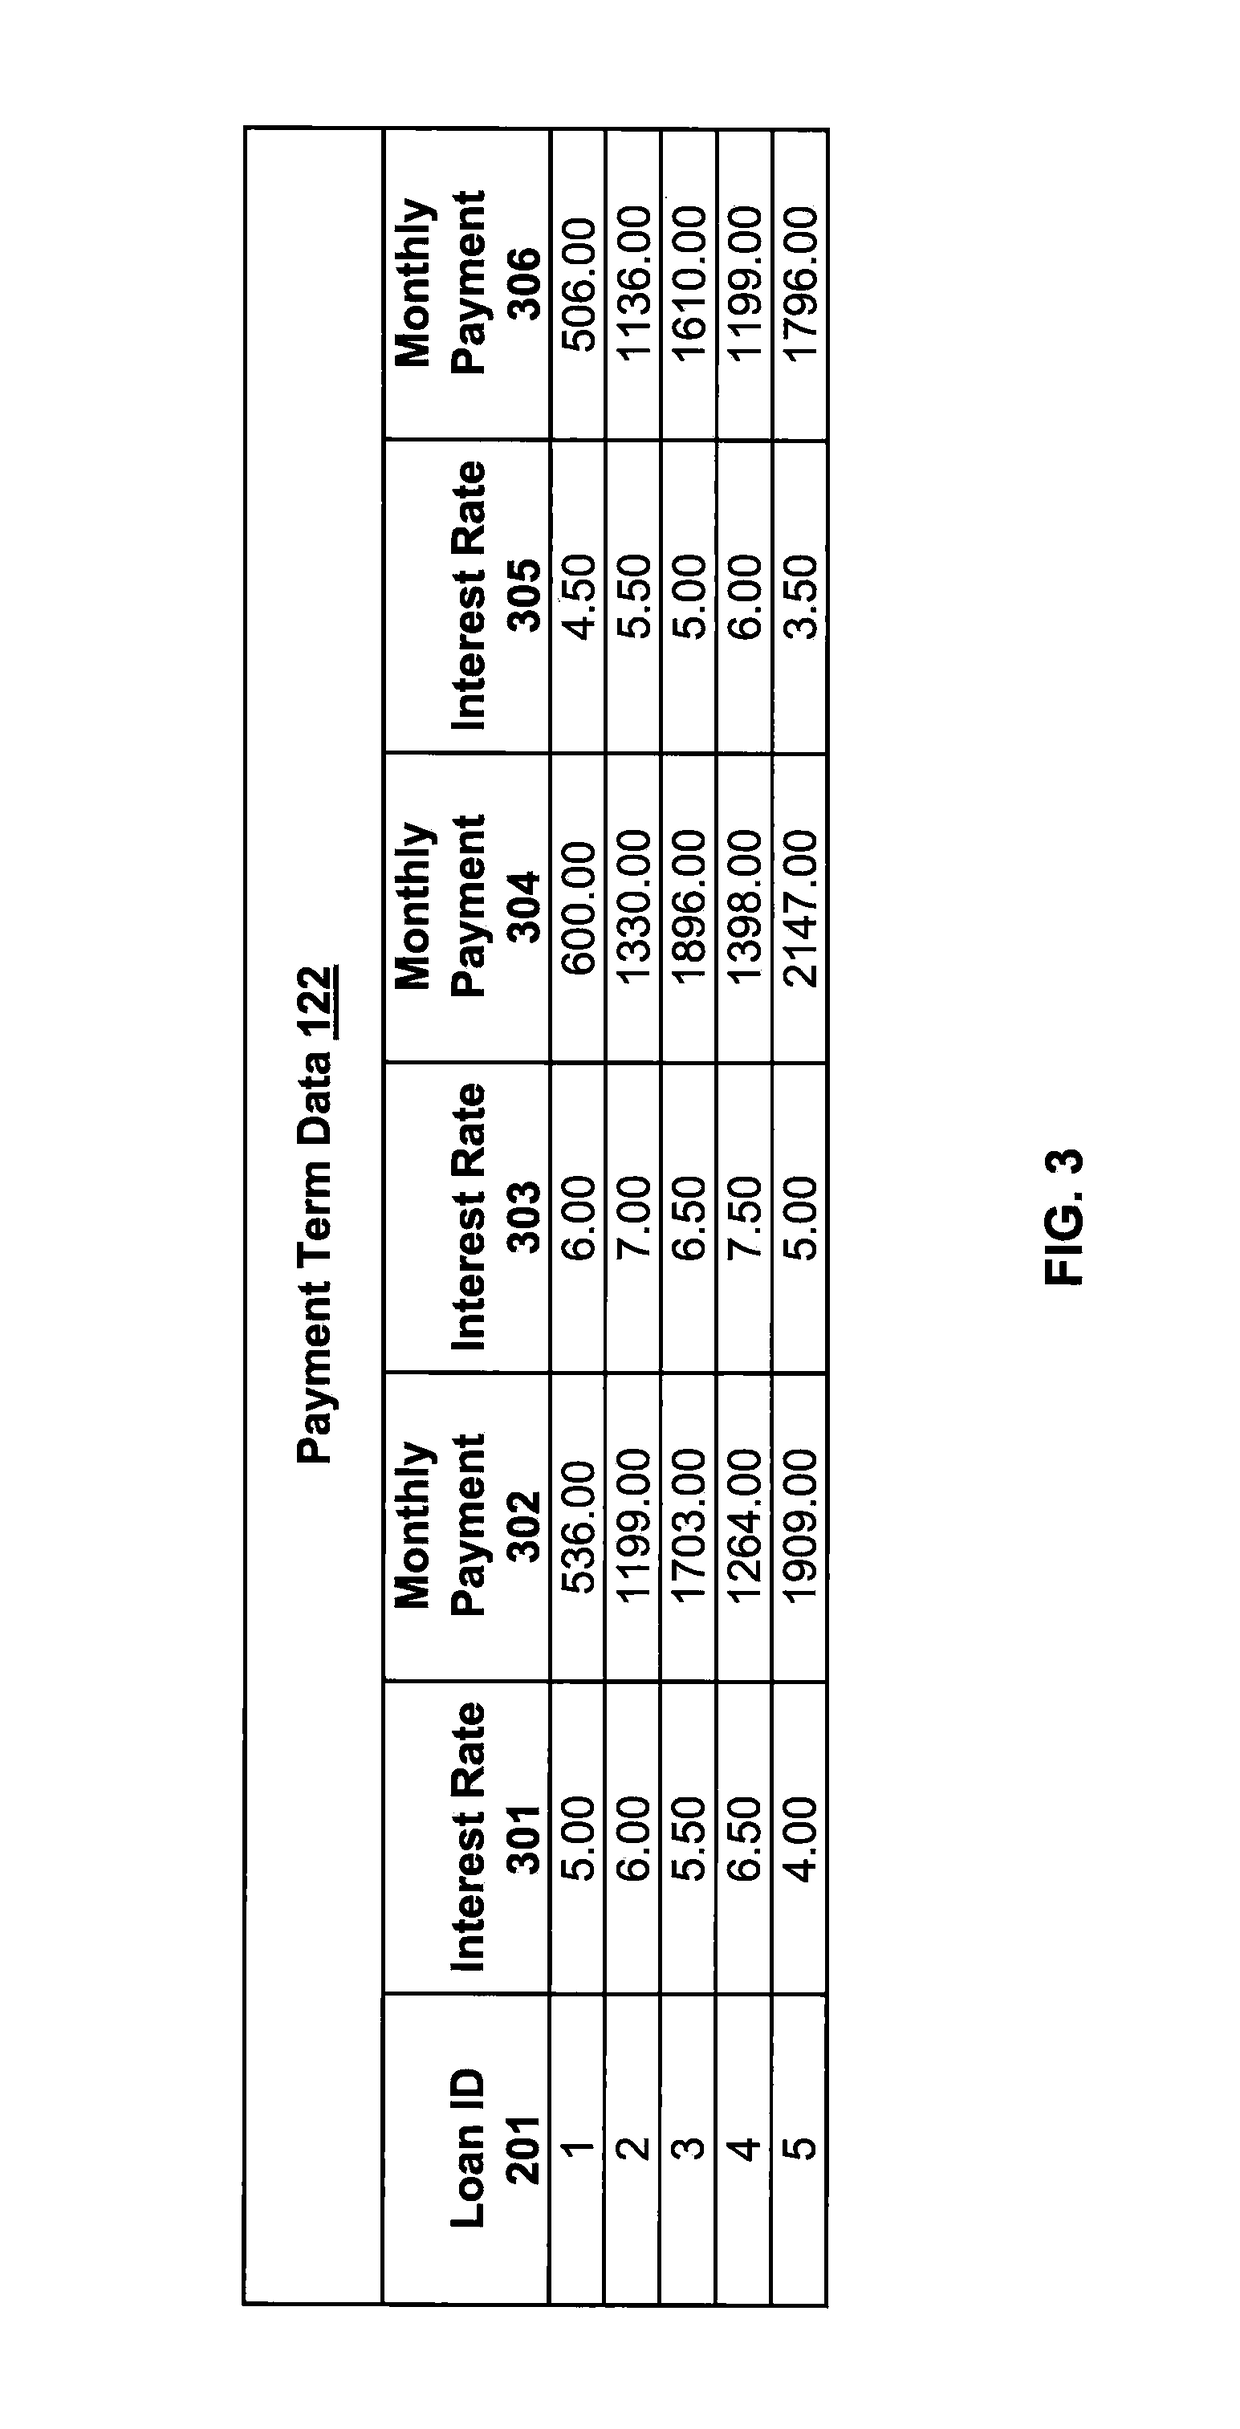 Systems and methods for selecting loan payment terms for improved loan quality and risk management